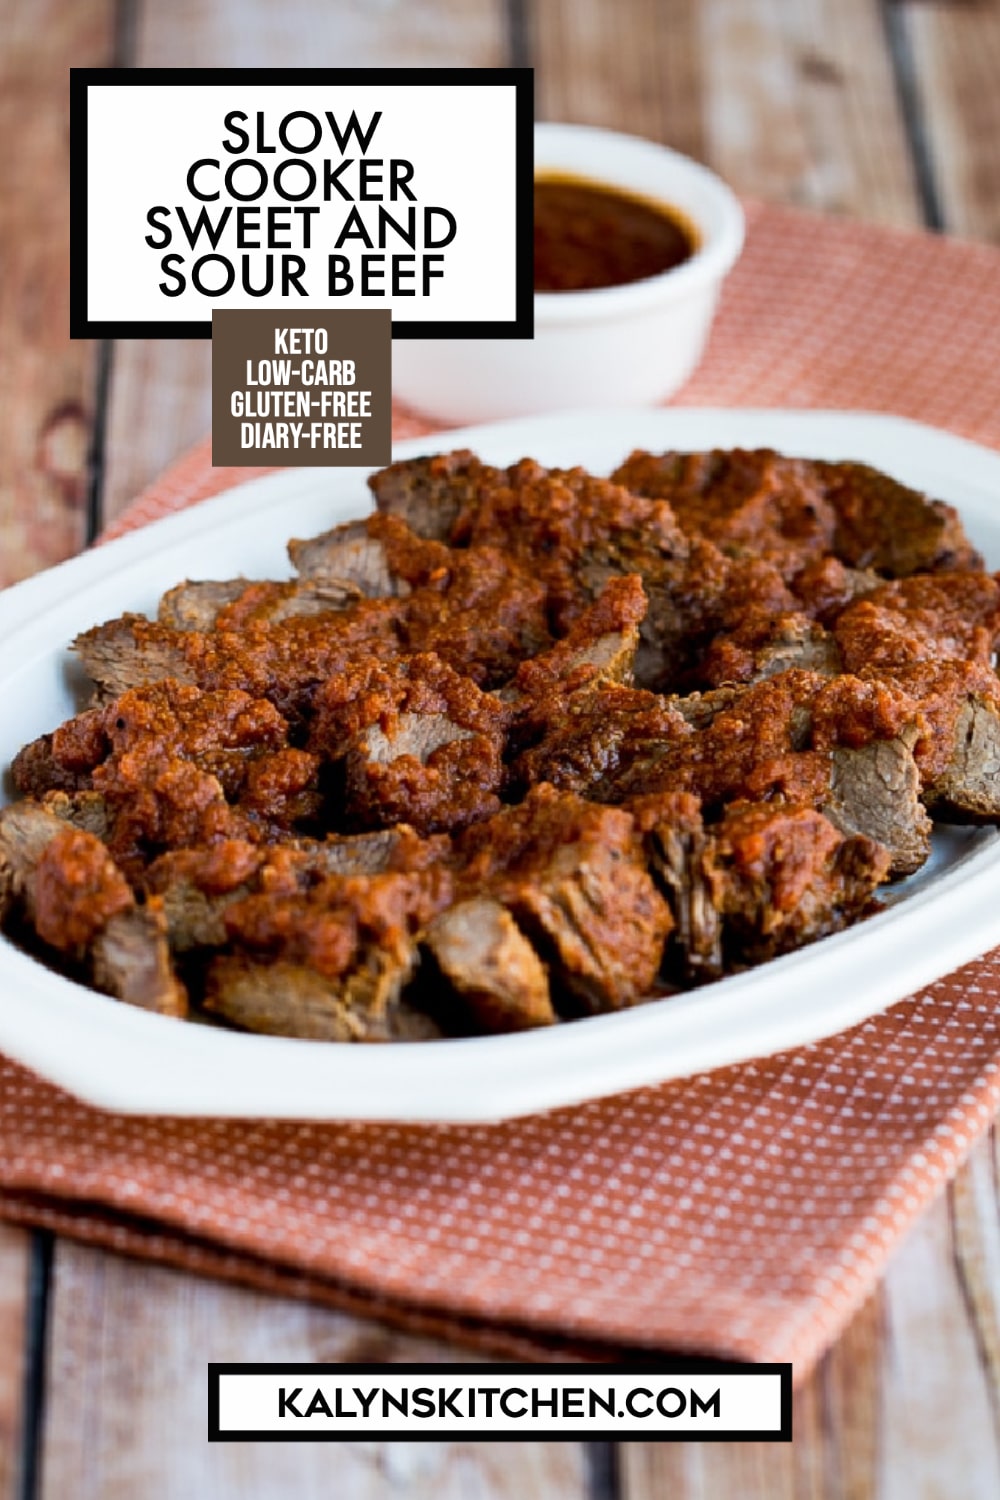 Pinterest image of Slow Cooker Sweet and Sour Beef